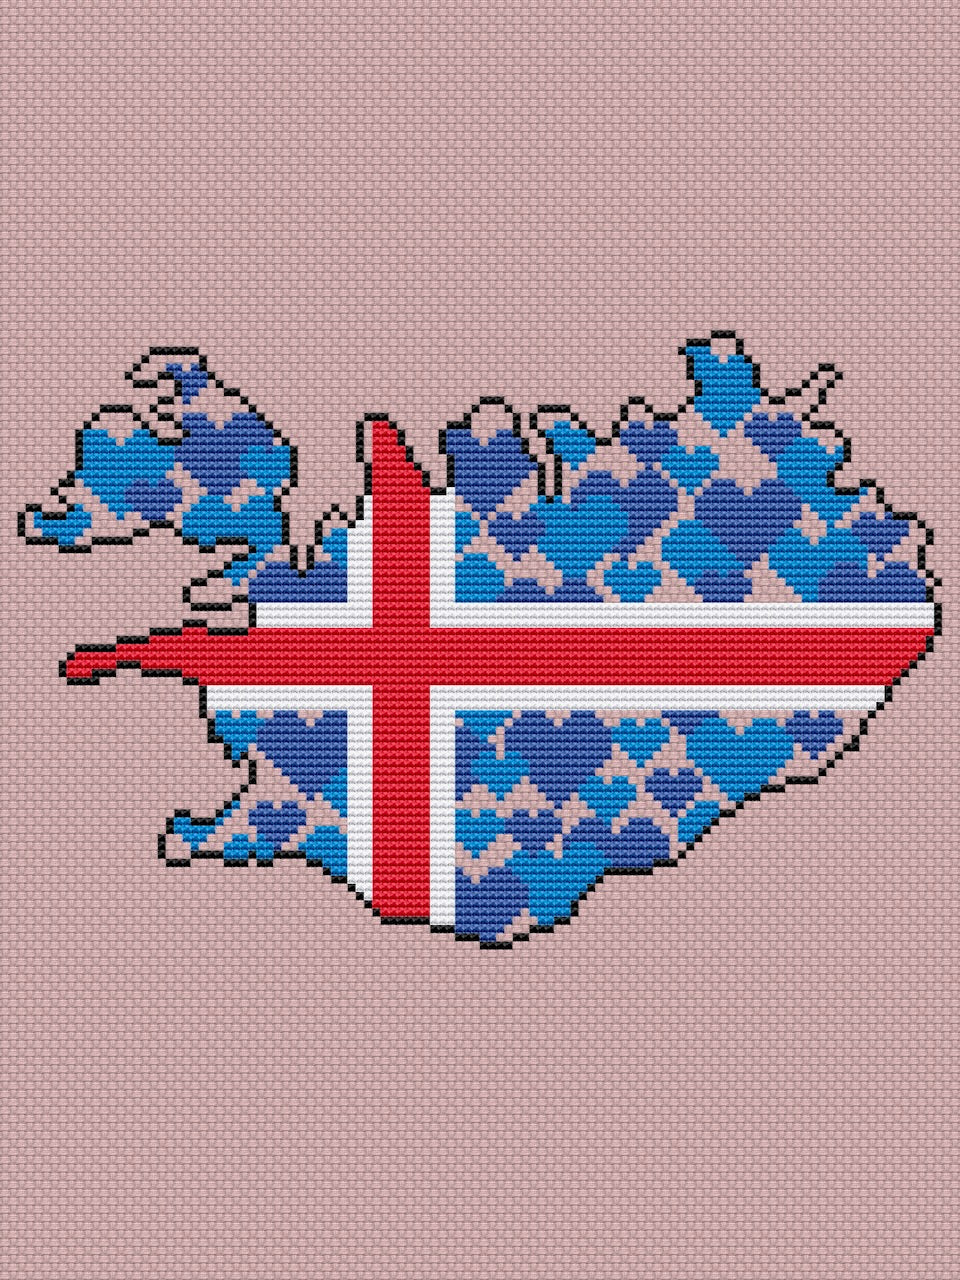 Iceland embroidery